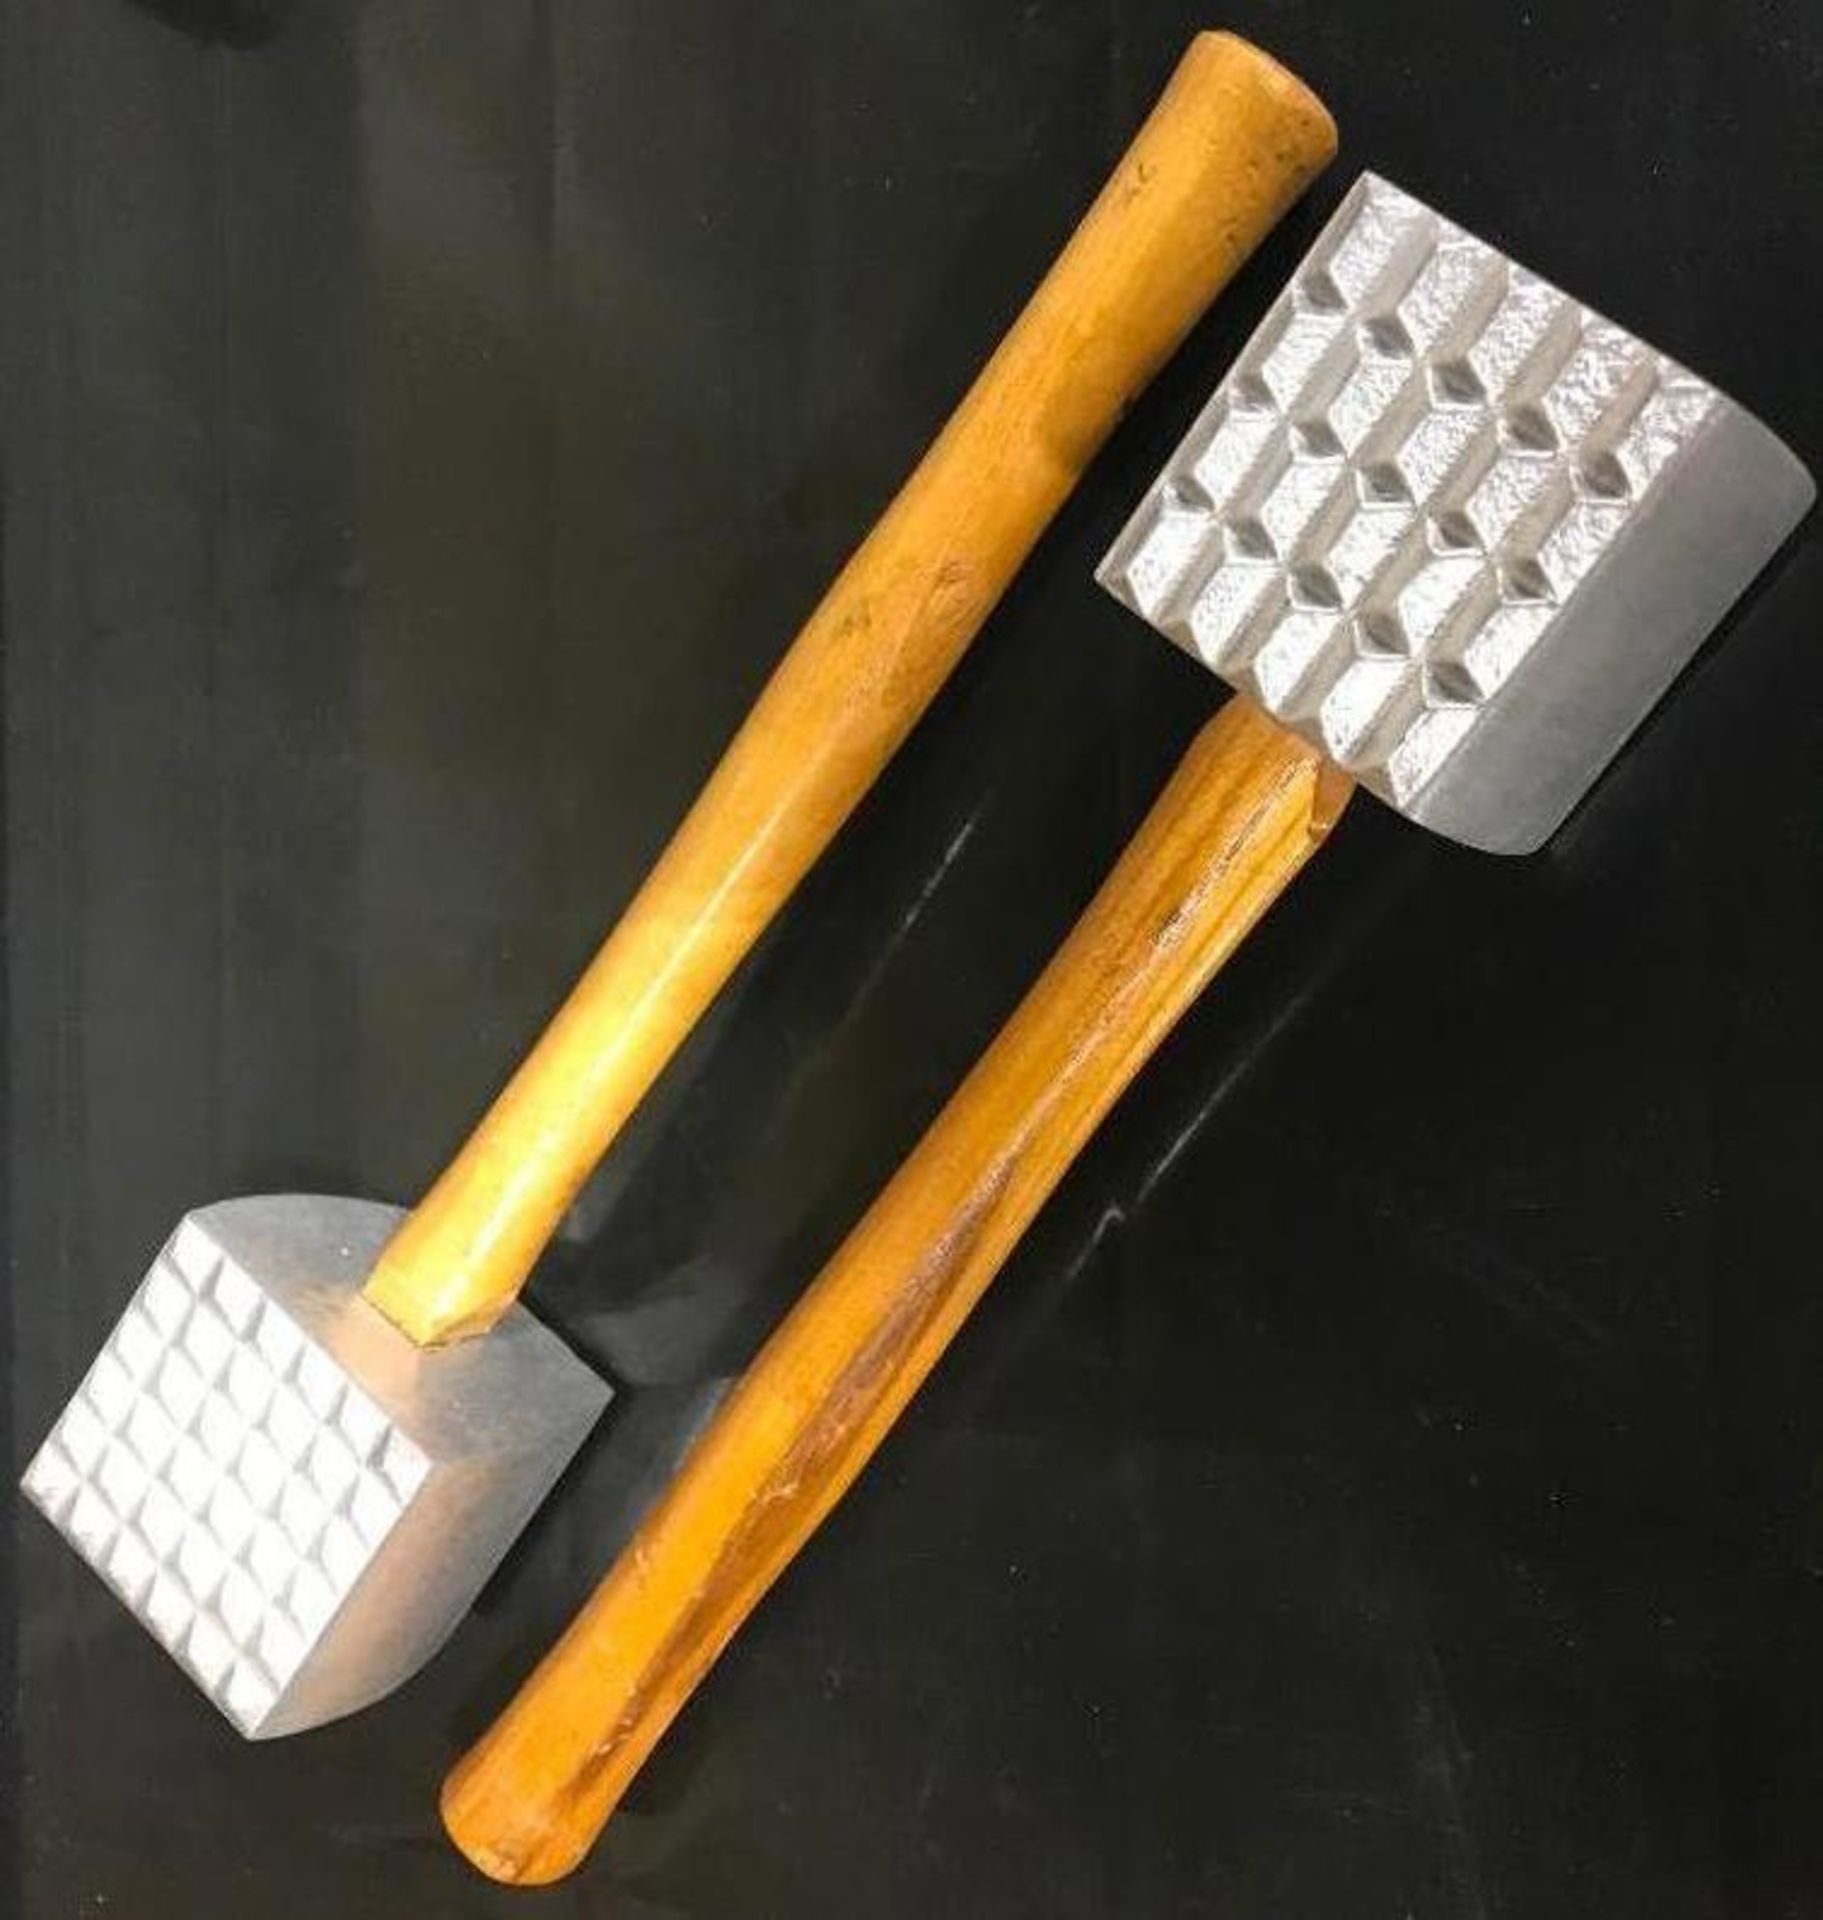 2.75" ALUMINUM MEAT TENDERIZER, WOODEN HANDLE, 11 " LONG, JOHNSON ROSE 3005 - LOT OF 2 - NEW - Image 2 of 3